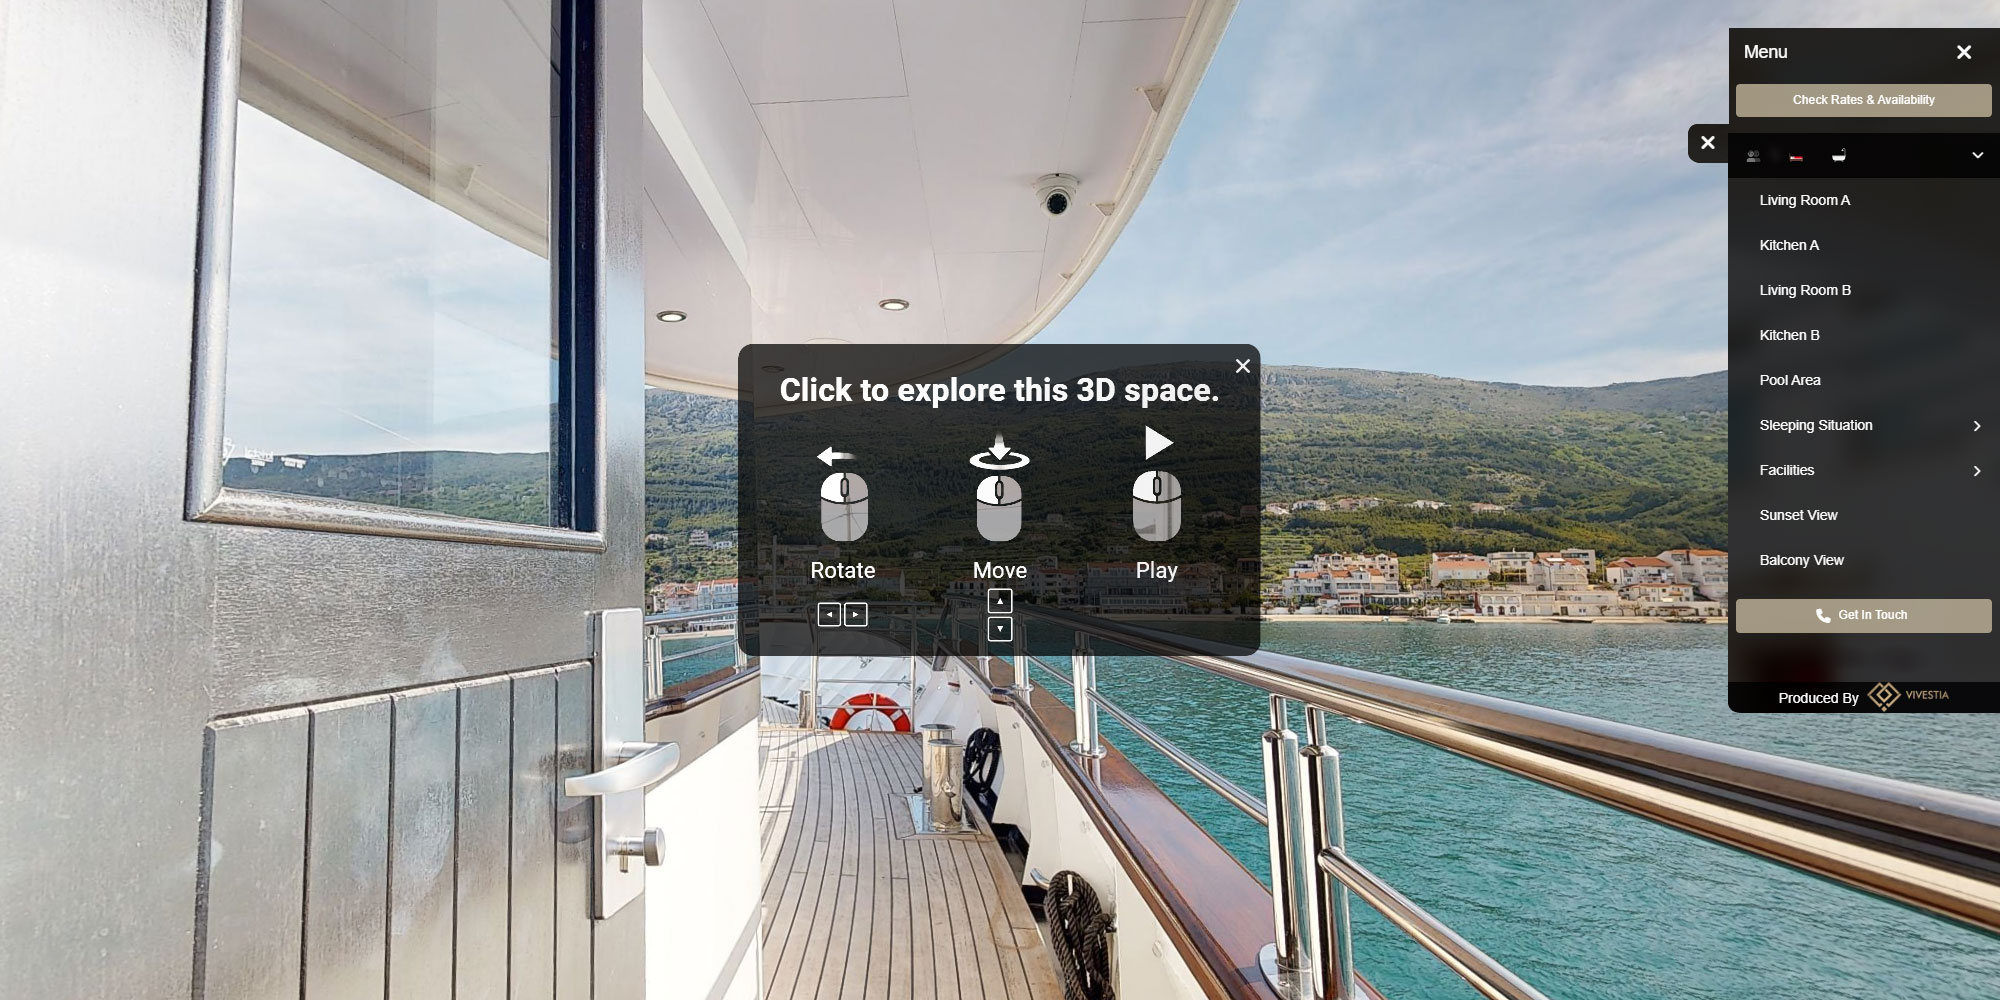 Step Inside Before You Check In: Exploring Hotel Virtual Tours-Vivestia | Risk-Free Villas, Hotels and Cruises in VR